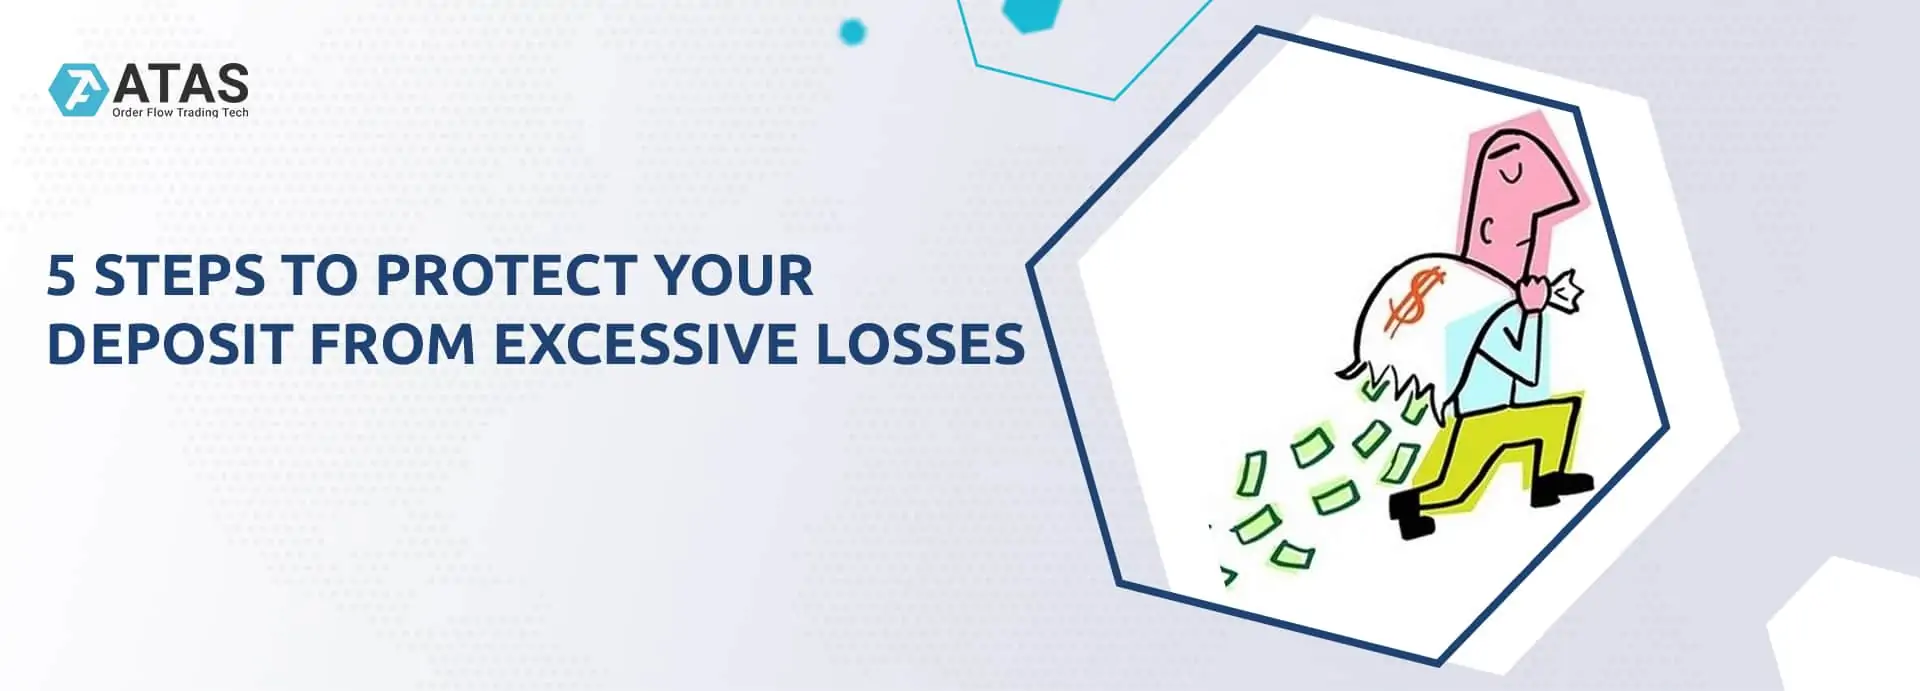 5 steps to protect your deposit from excessive losses